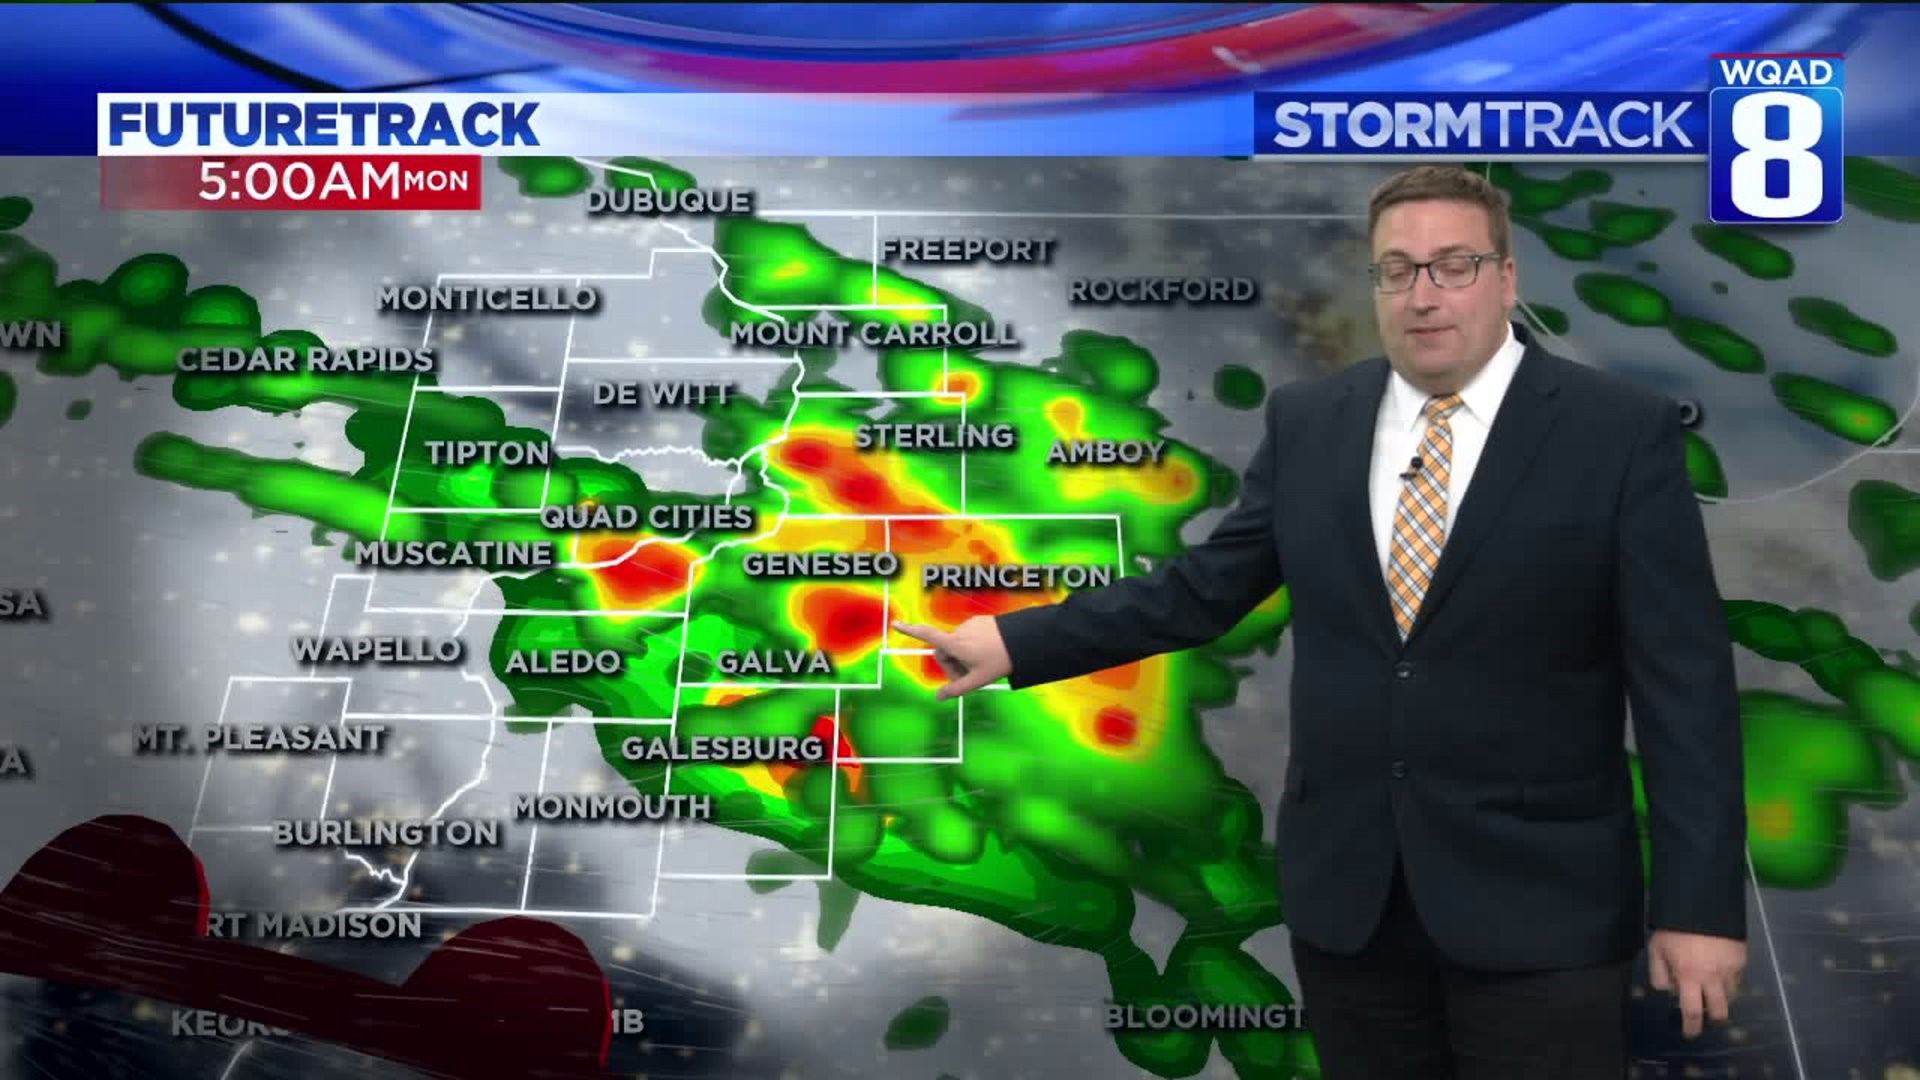 Tracking several chances for showers and storms this week